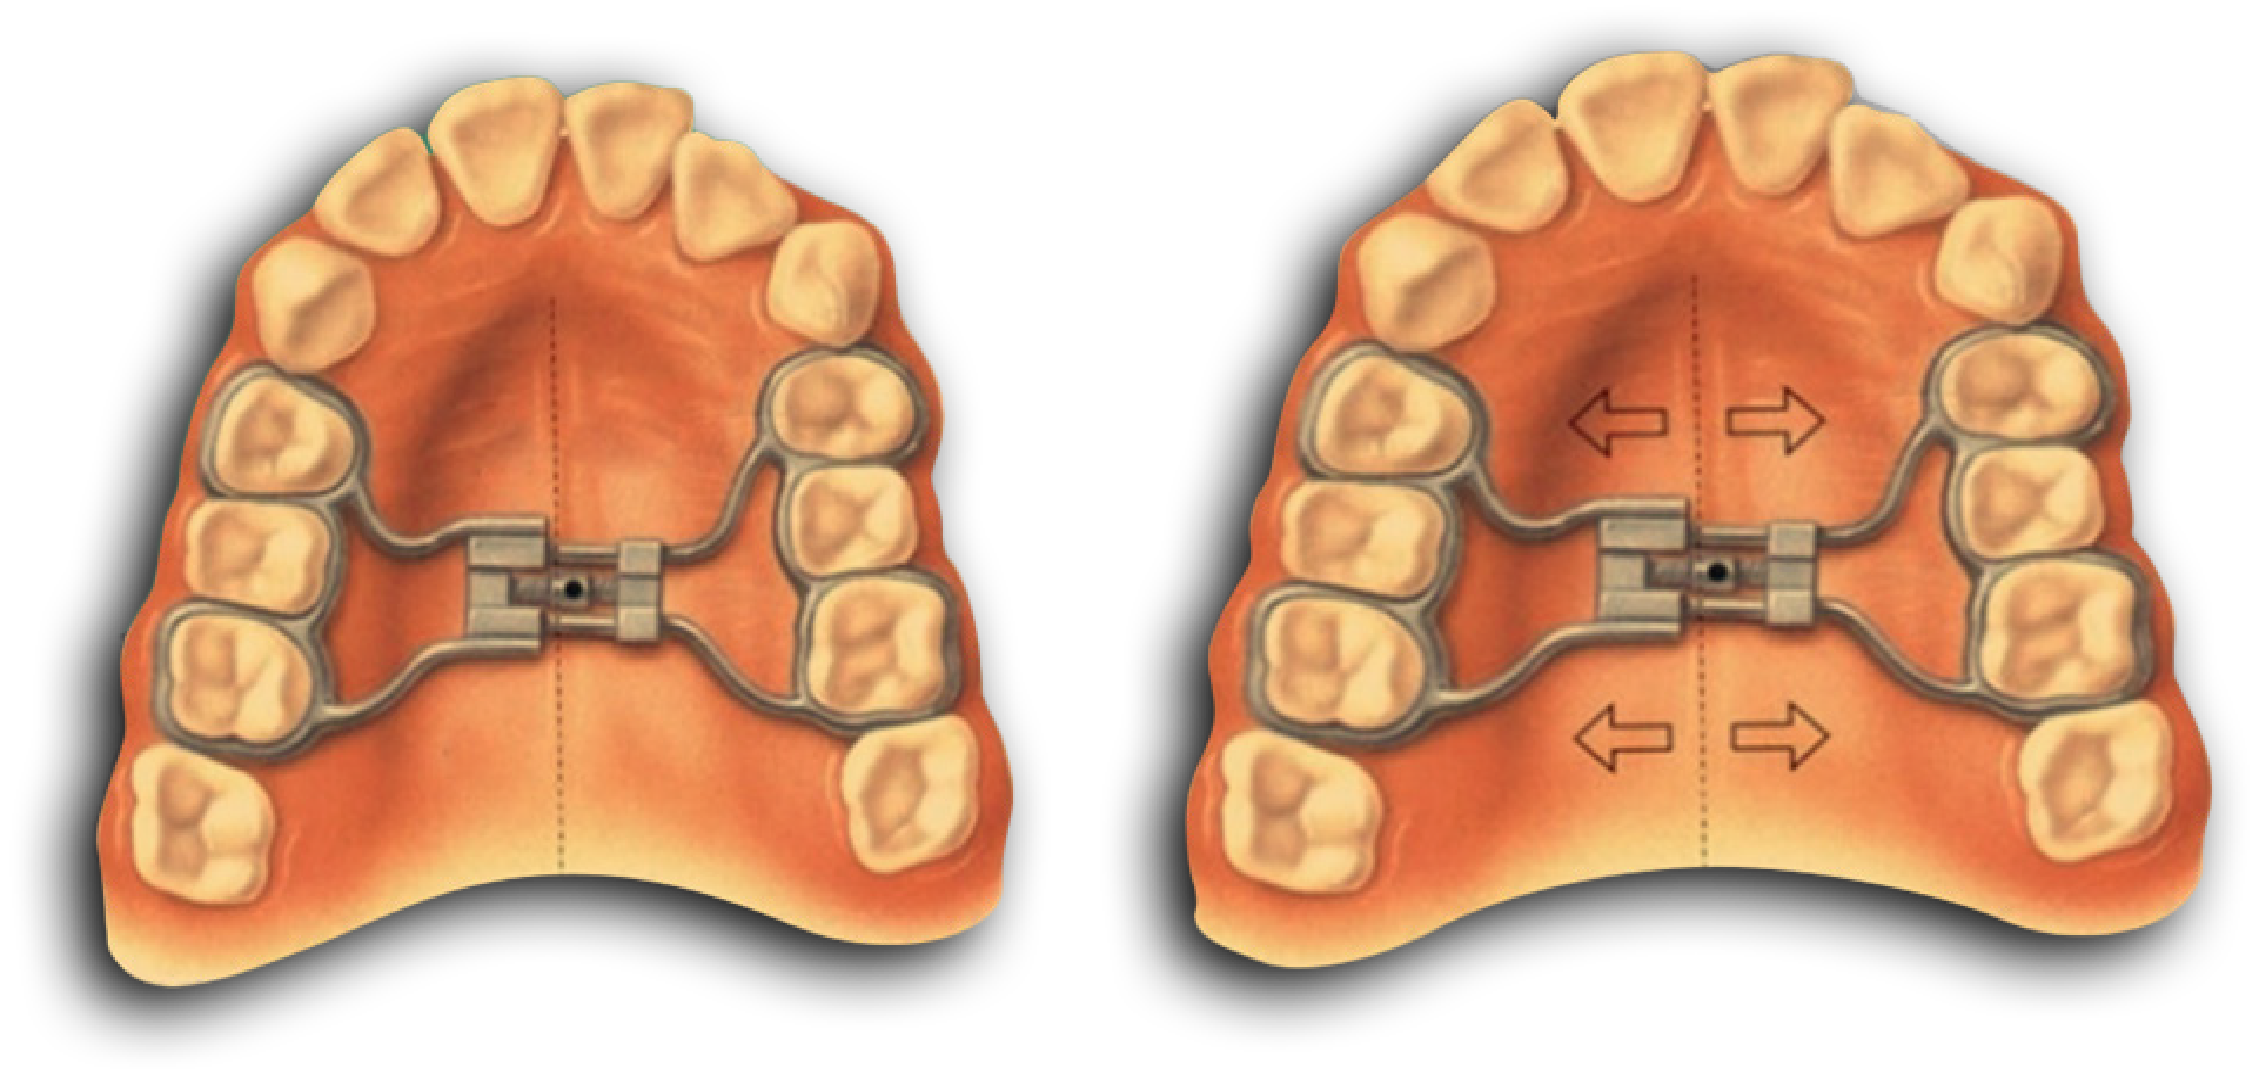 A Rapid Palatal Expander is shown expanding the width of the upper palate.